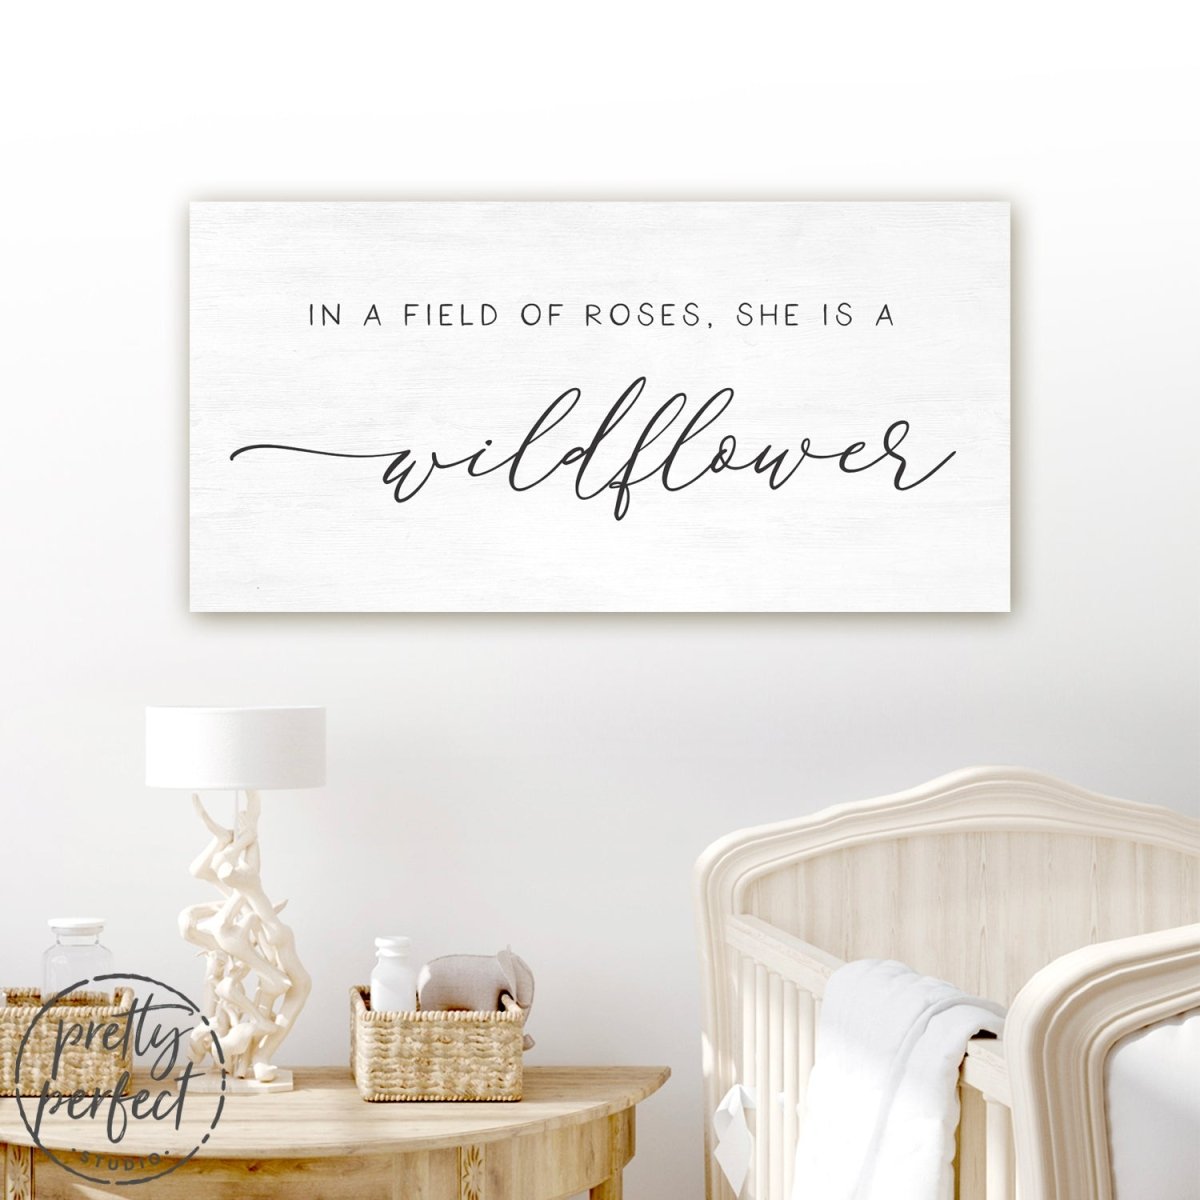 In A Field Of Roses She Is a Wildflower Sign Hanging Above Baby Crib - Pretty Perfect Studio